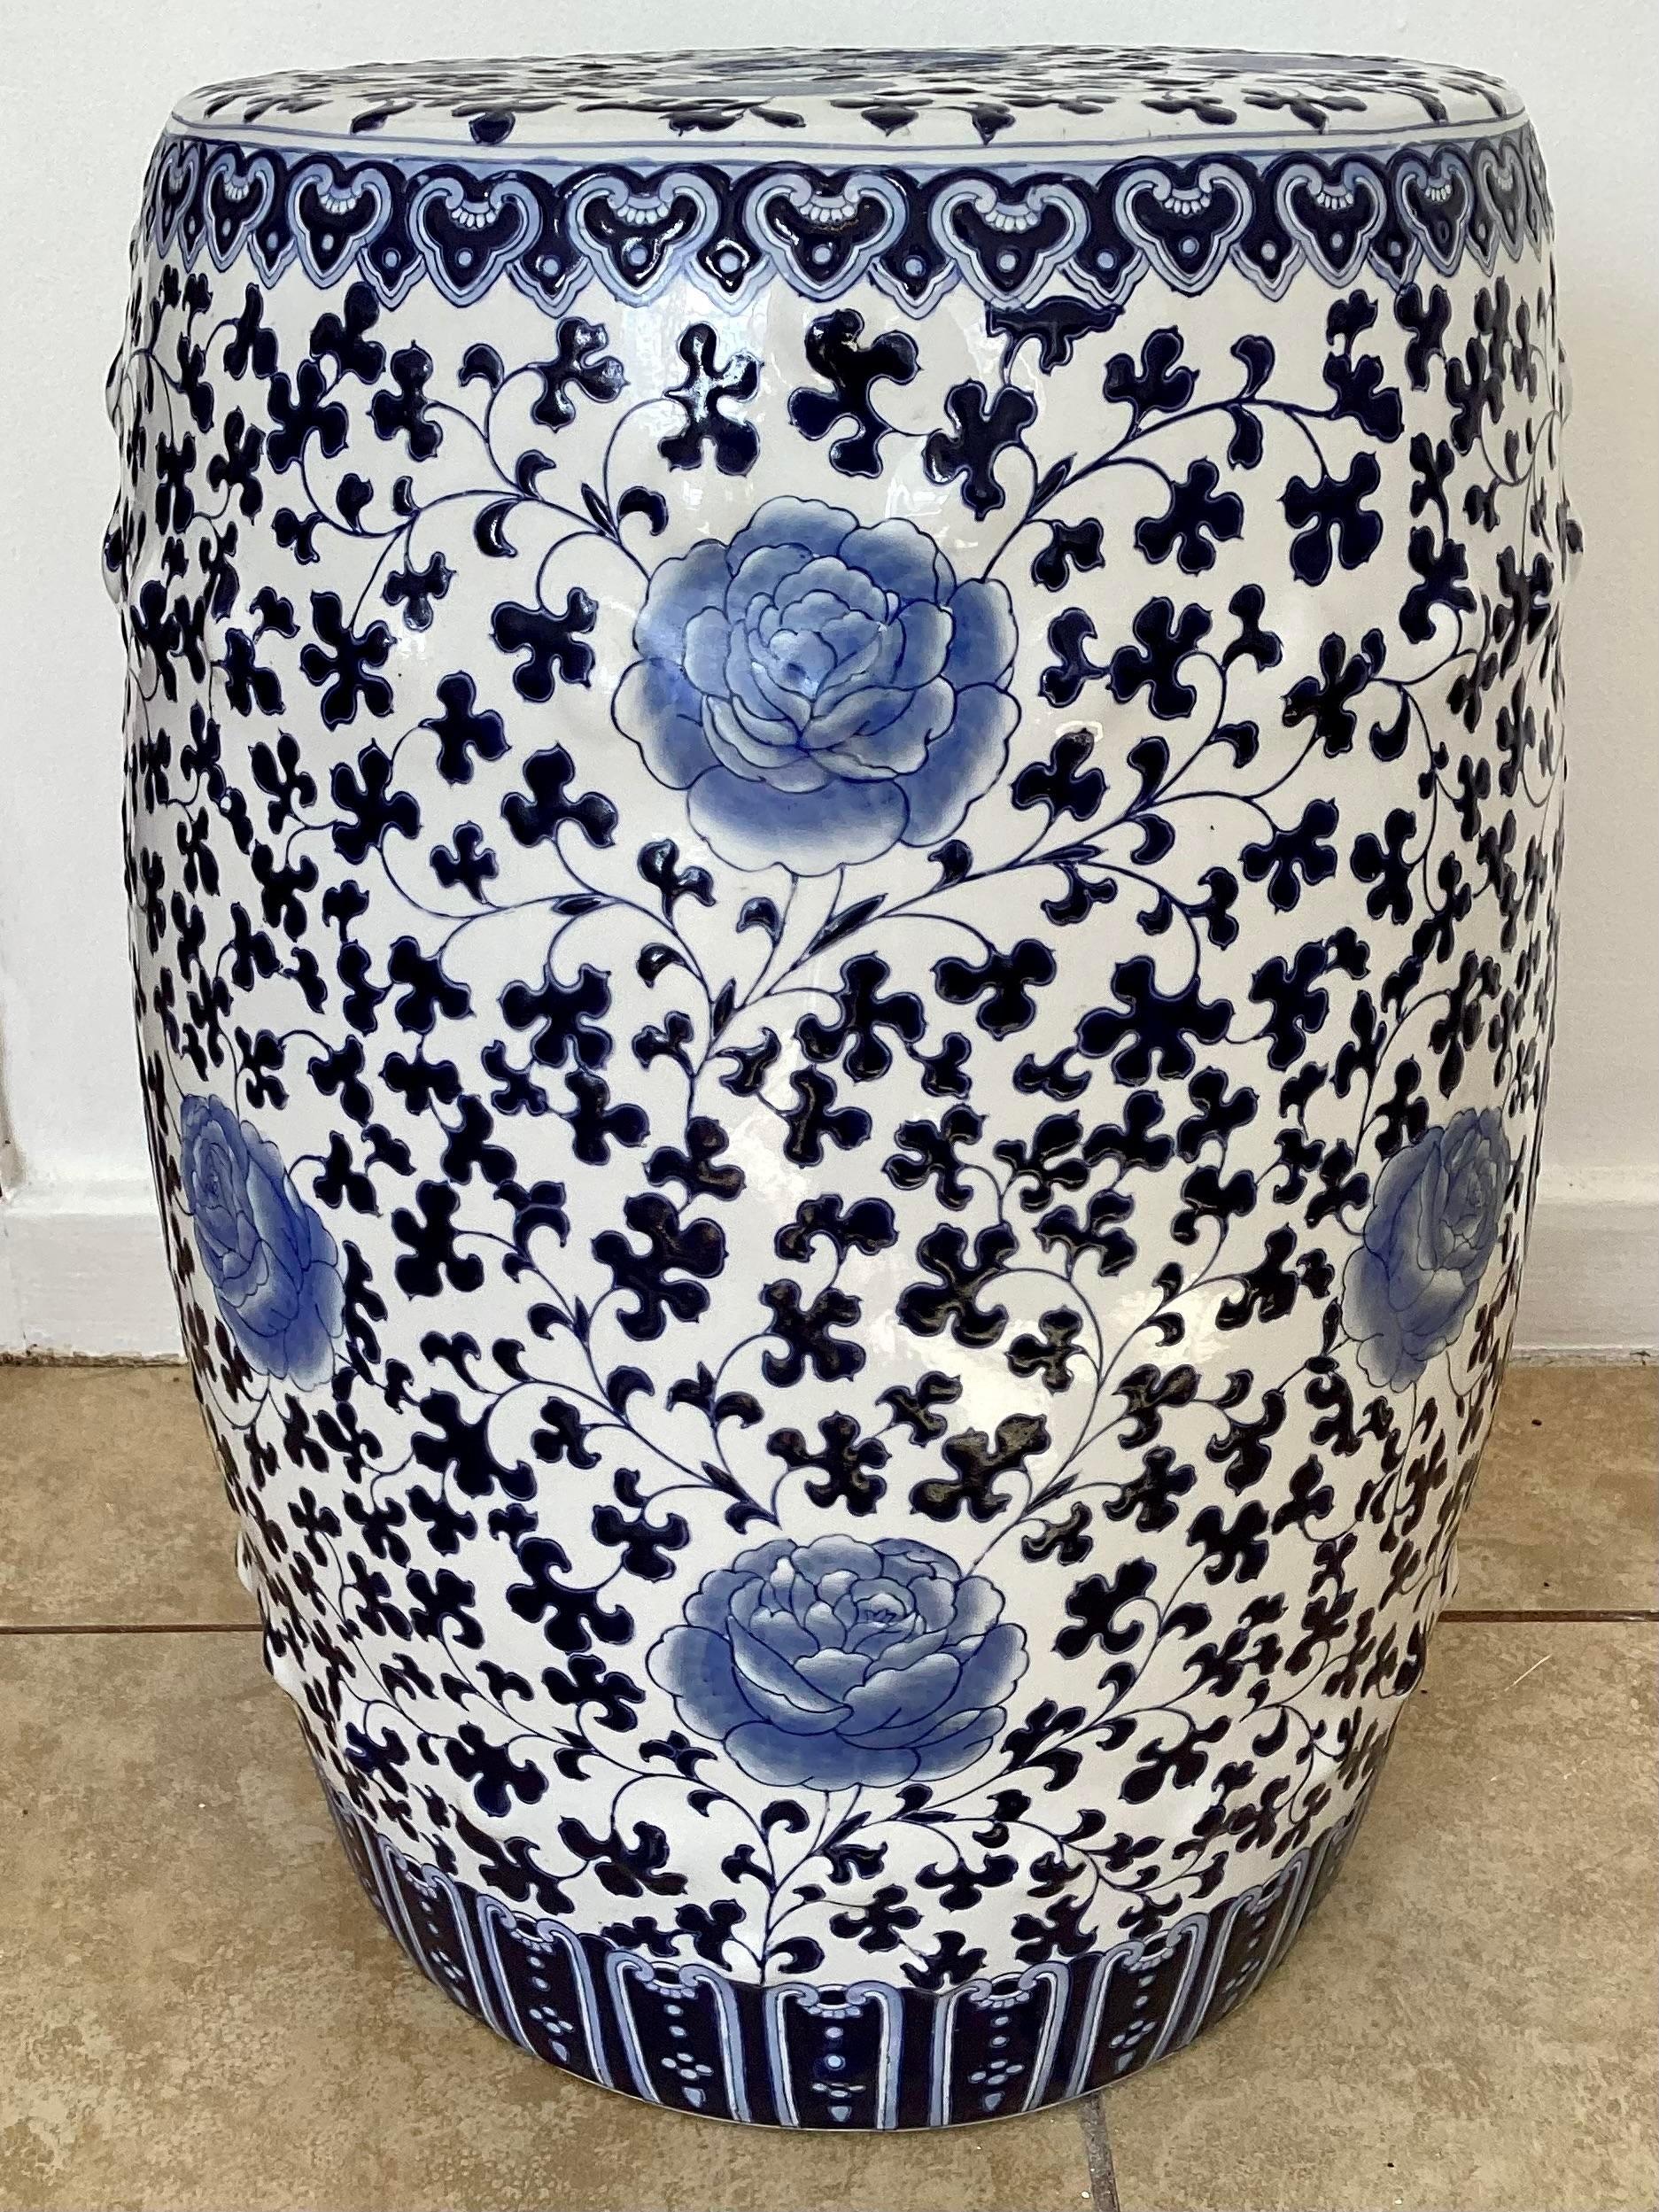 Beautiful blue and white ceramic garden seat with floral drawings. Great addition to your interiors and patio to hold your drinks and snacks.